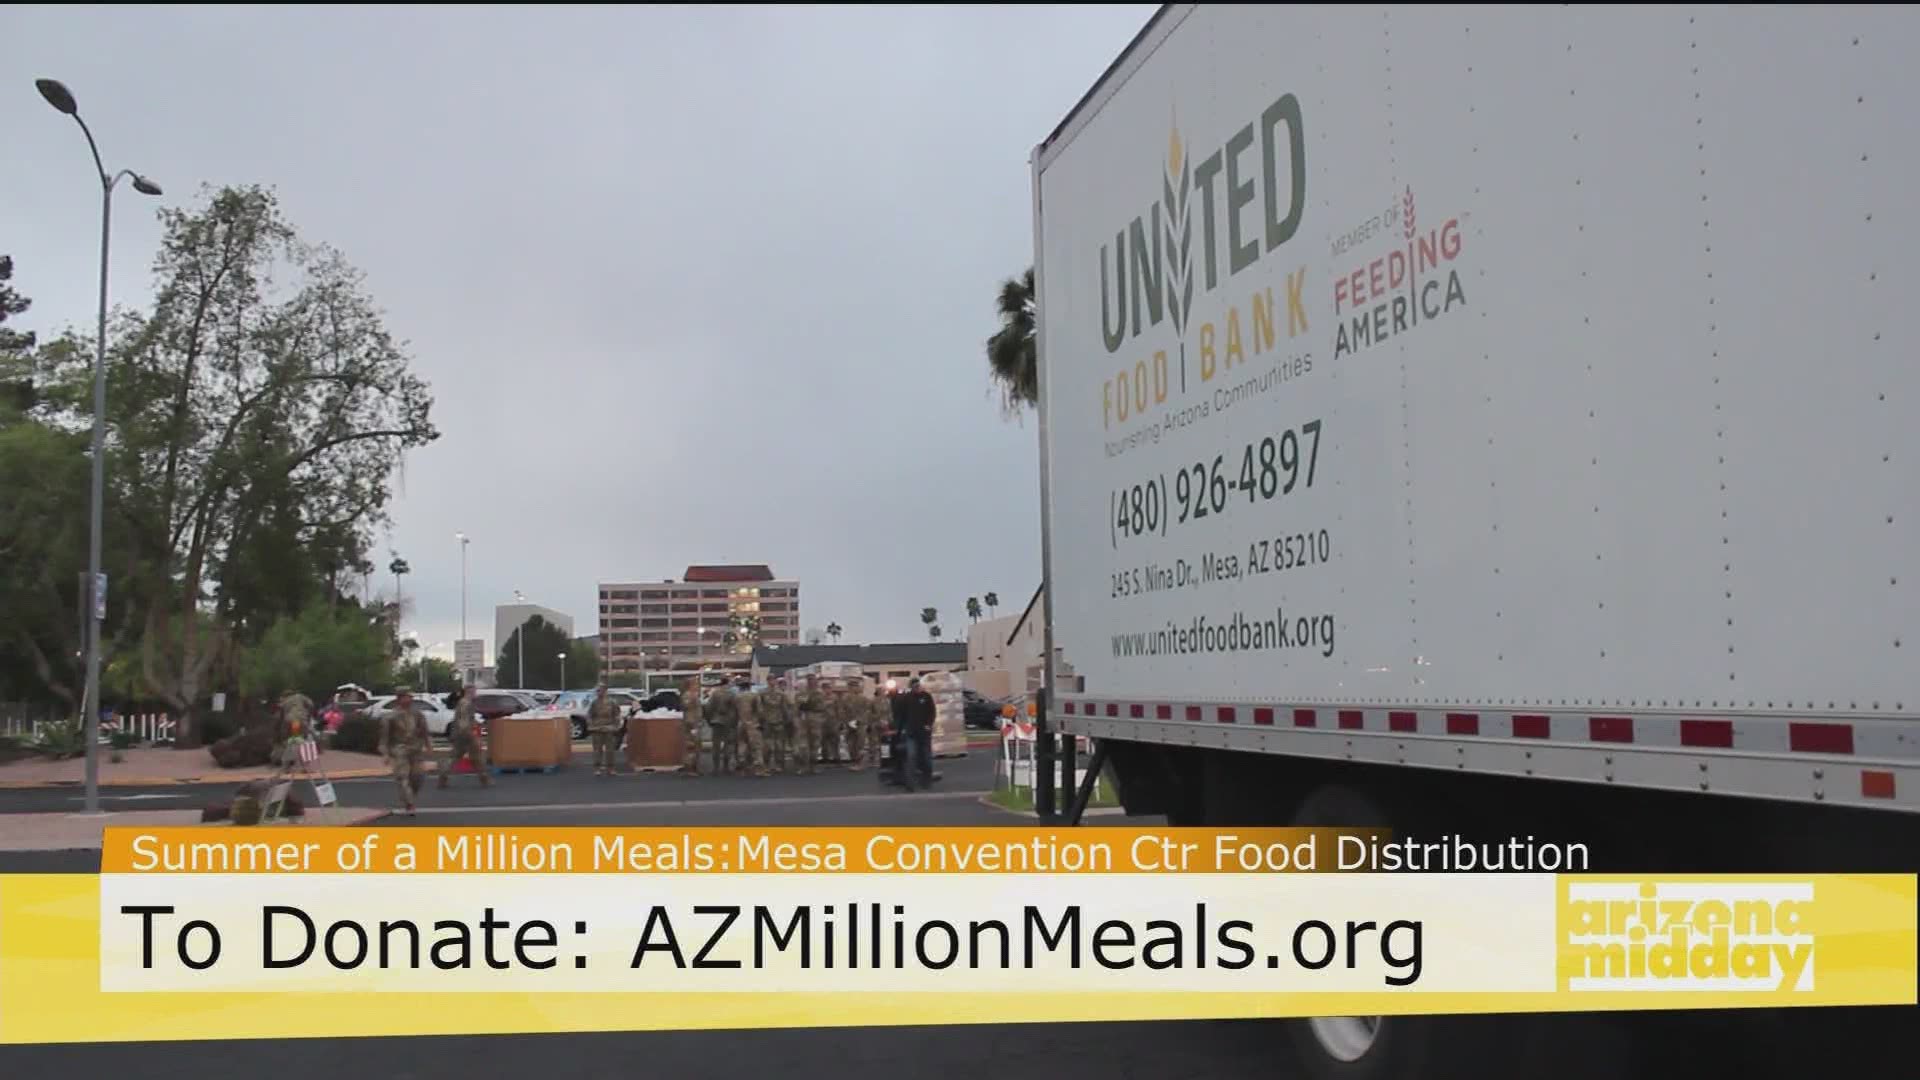 Jan meets up with United Food Bank's Tyson Nansel at the Mesa Convention Center's Food Distribution and shares why families should come down if they are in need